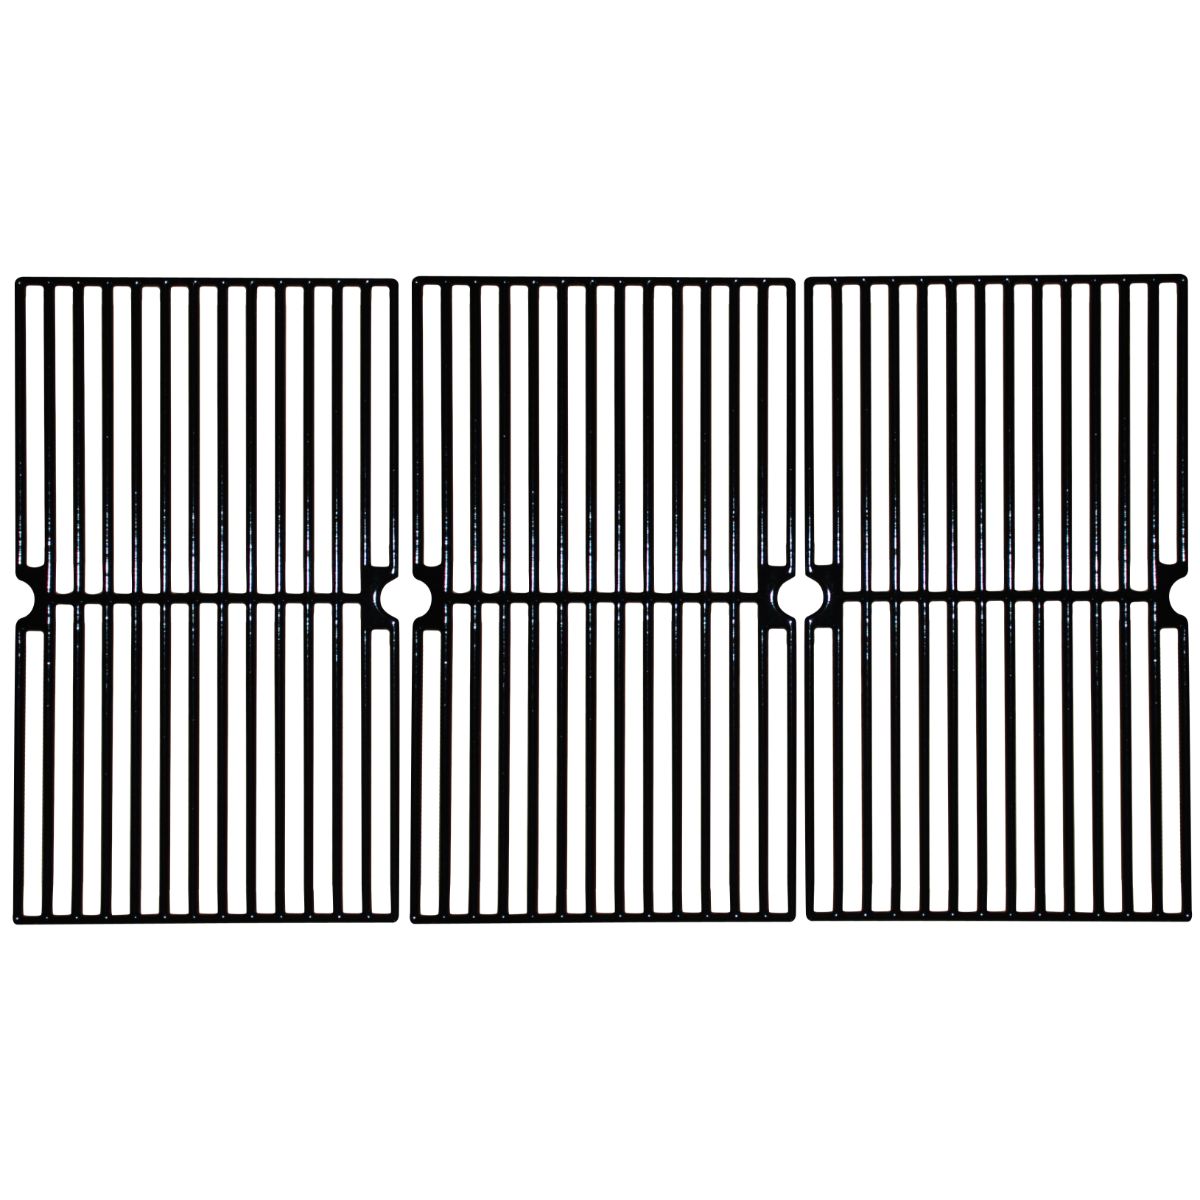 Gloss cast iron cooking grid for Nexgrill, Uniflame brand gas grills